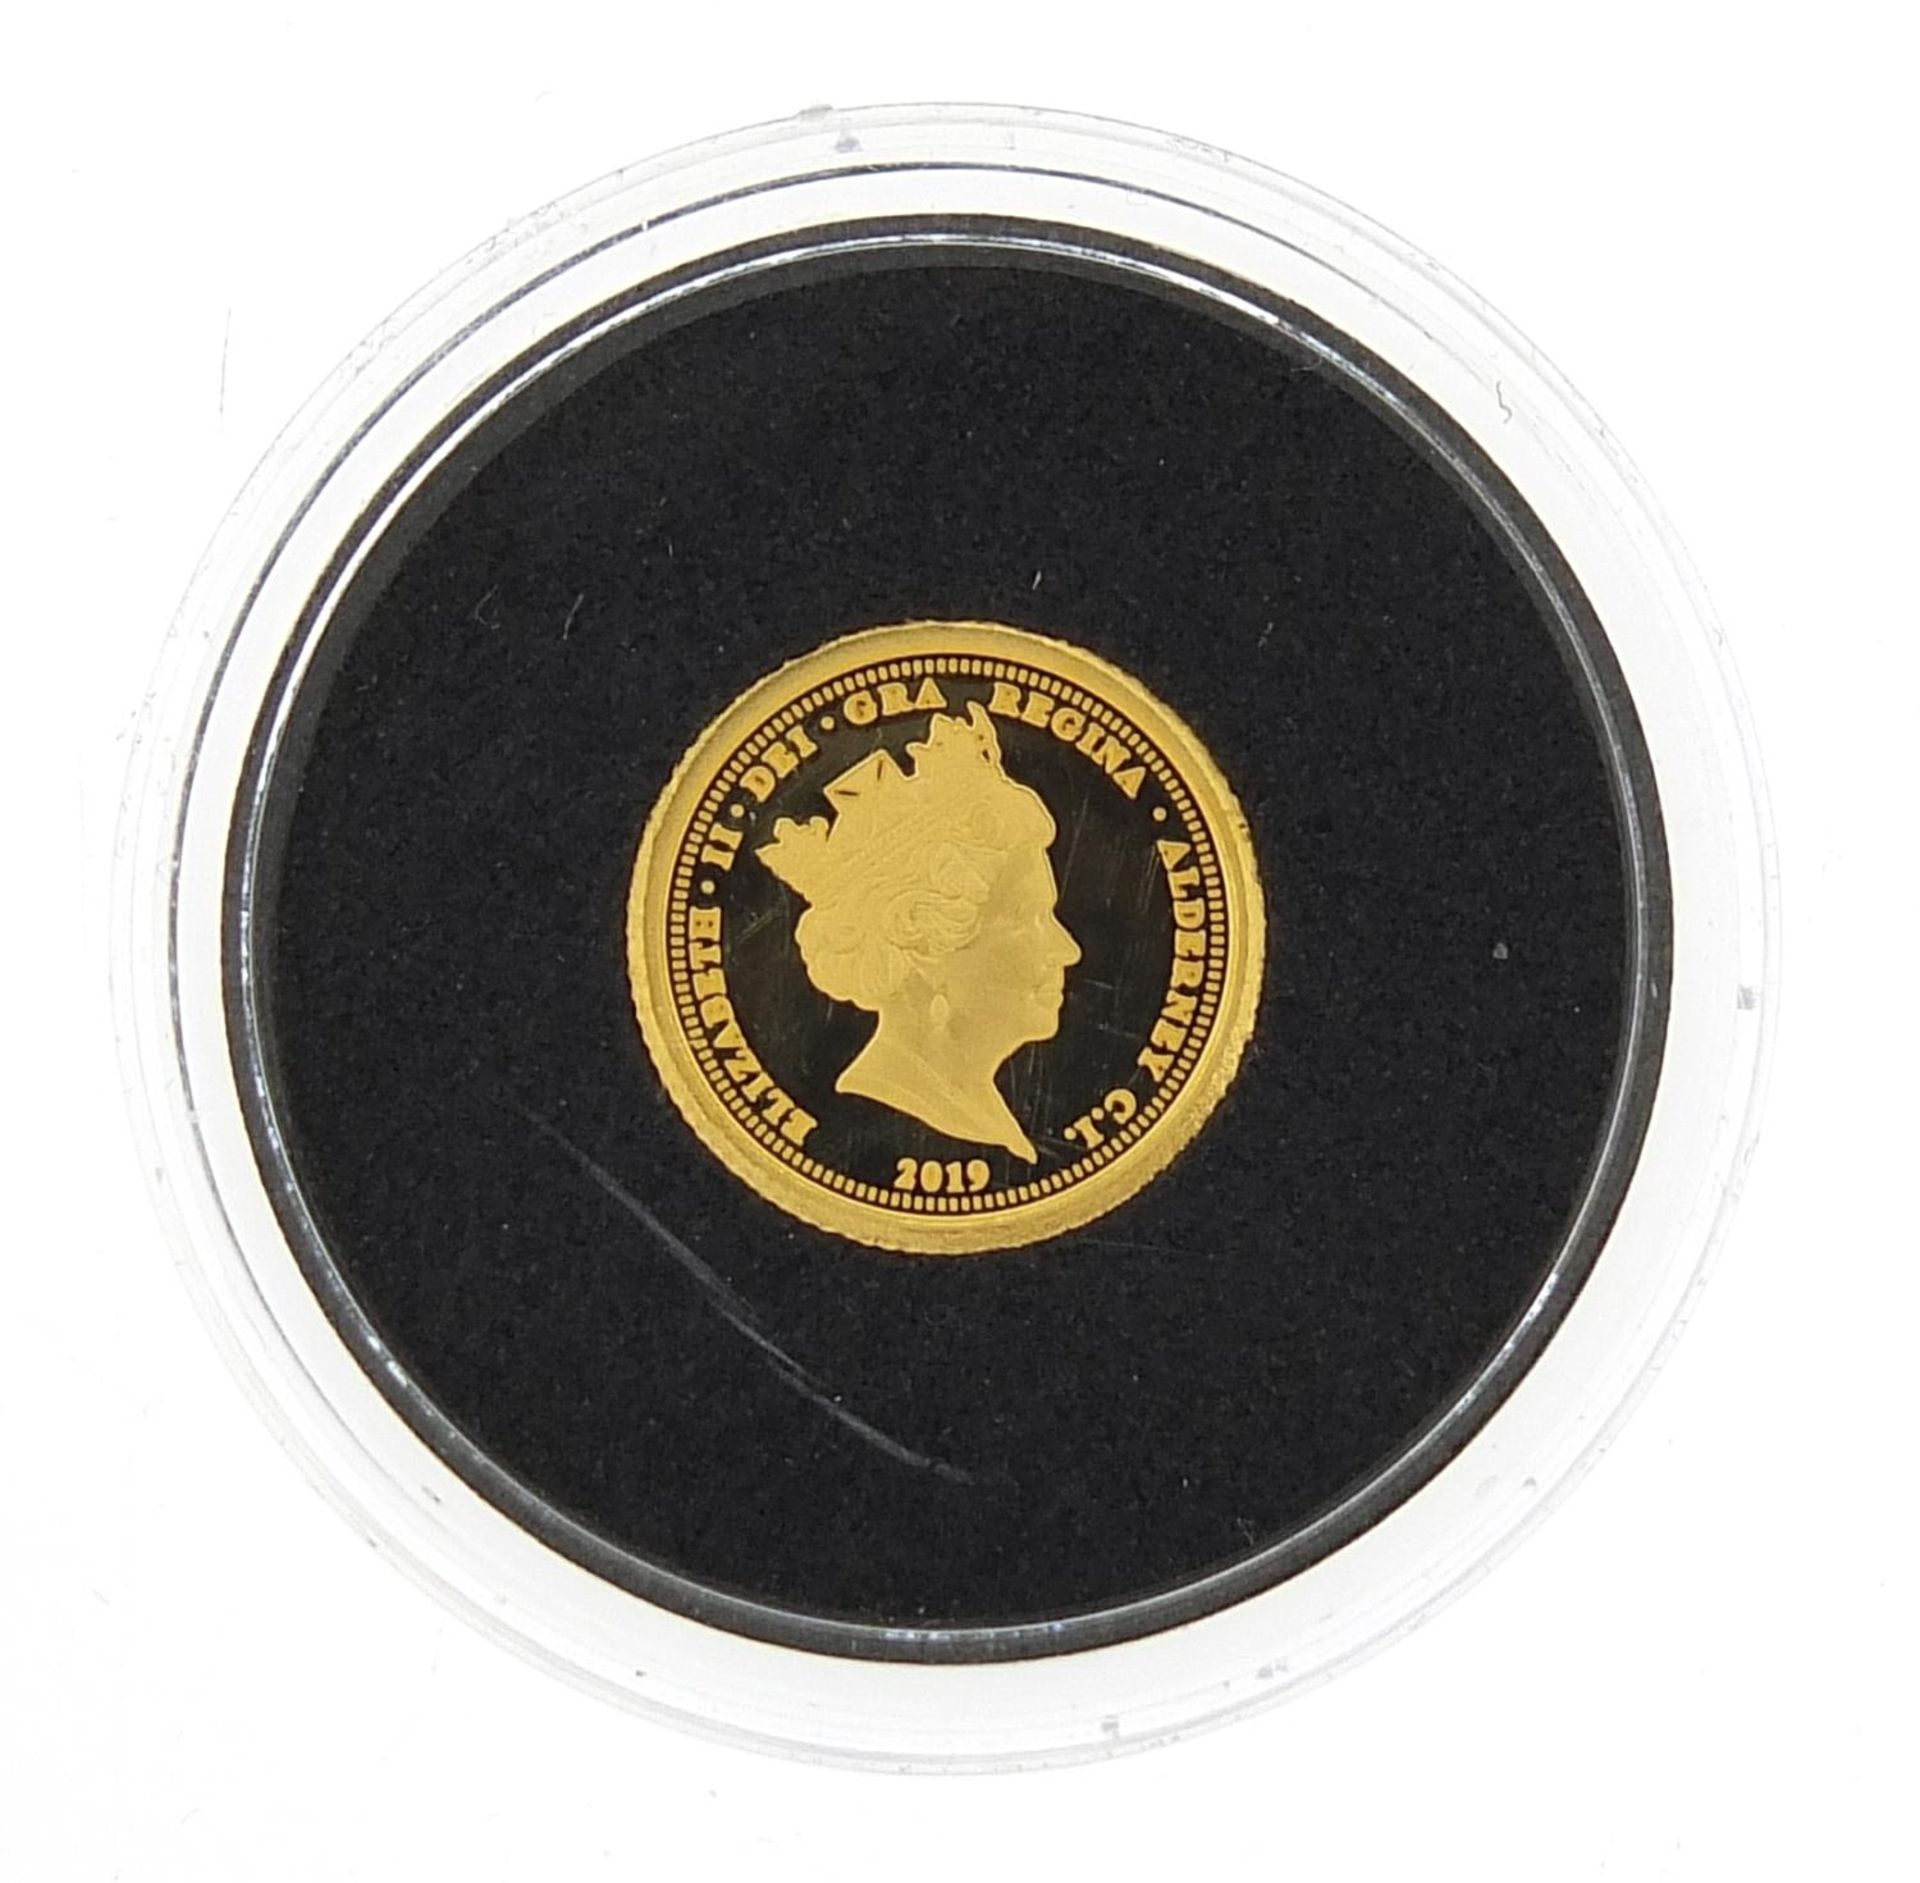 Gold proof 2019 Centenary of Remembrance five pound coin with certificate - this lot is sold without